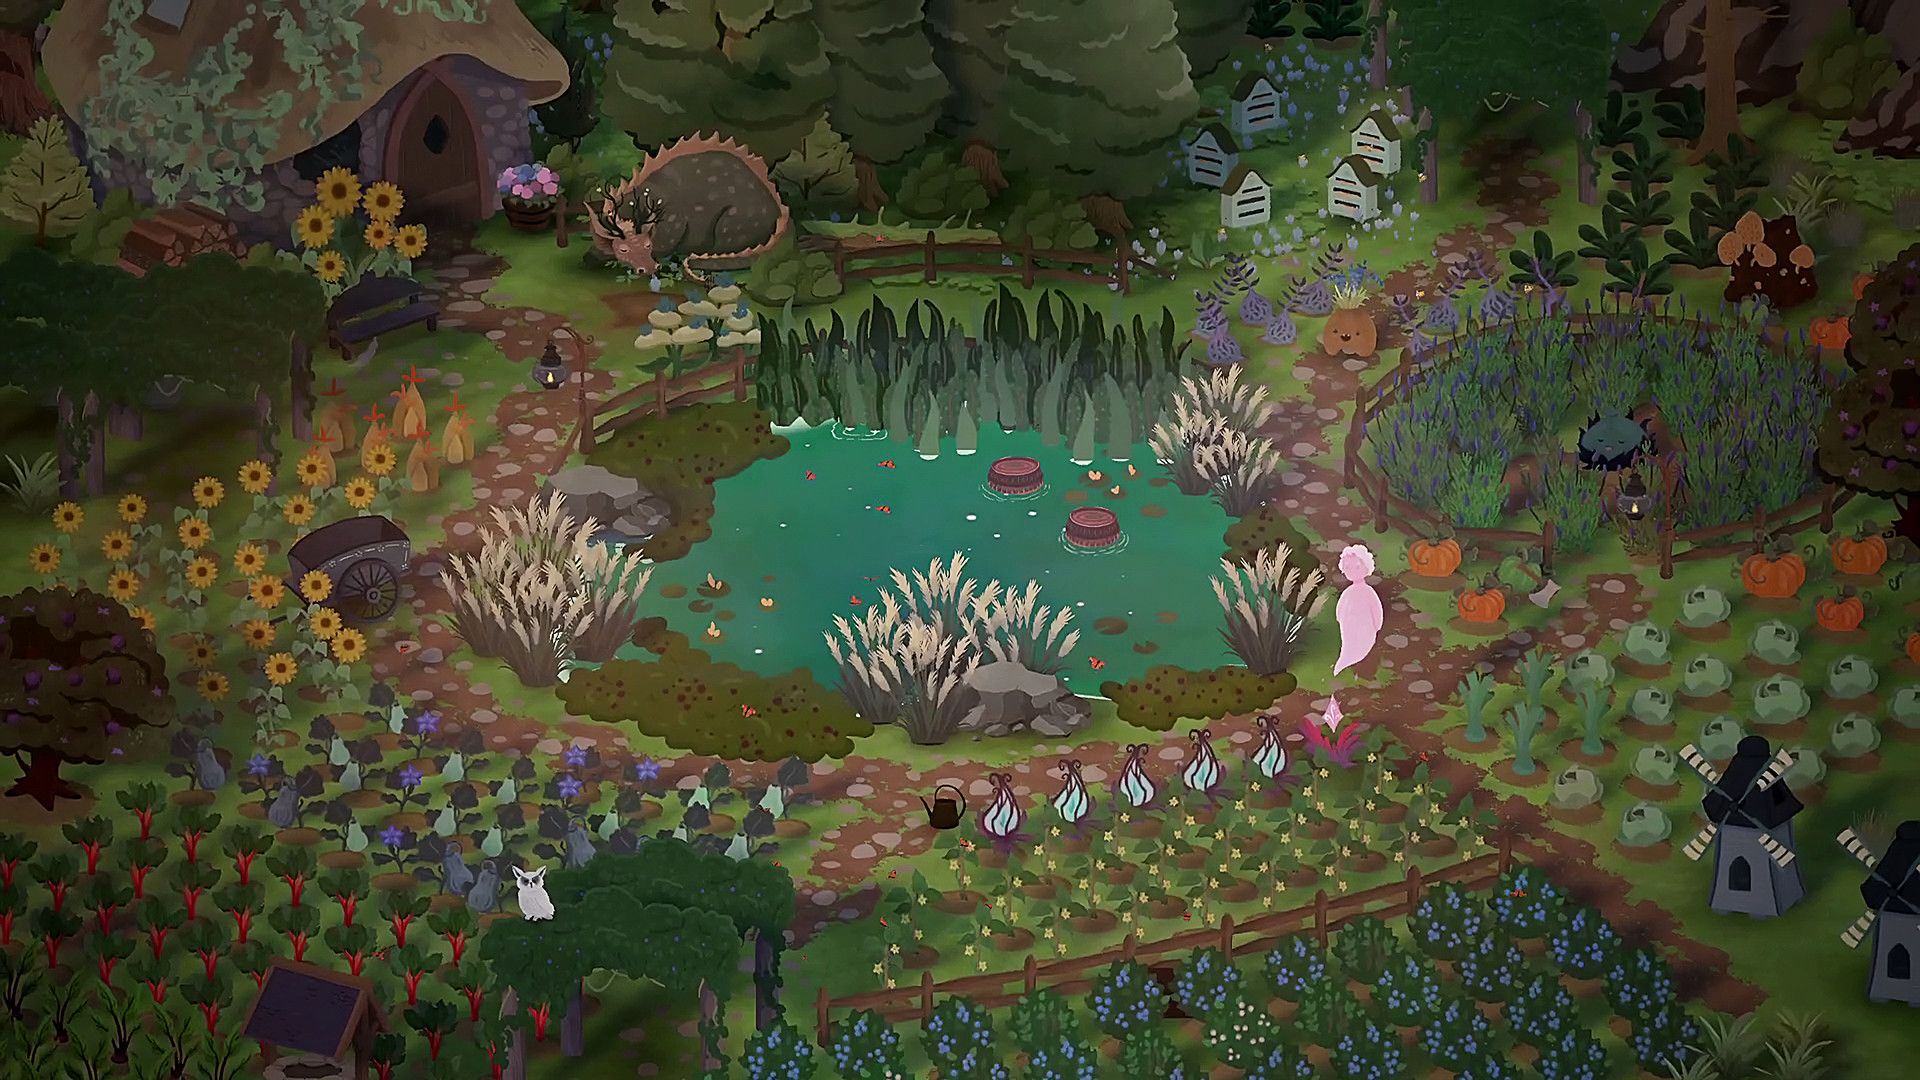 Video game screenshot of a garden with a dragon sleeping nearby